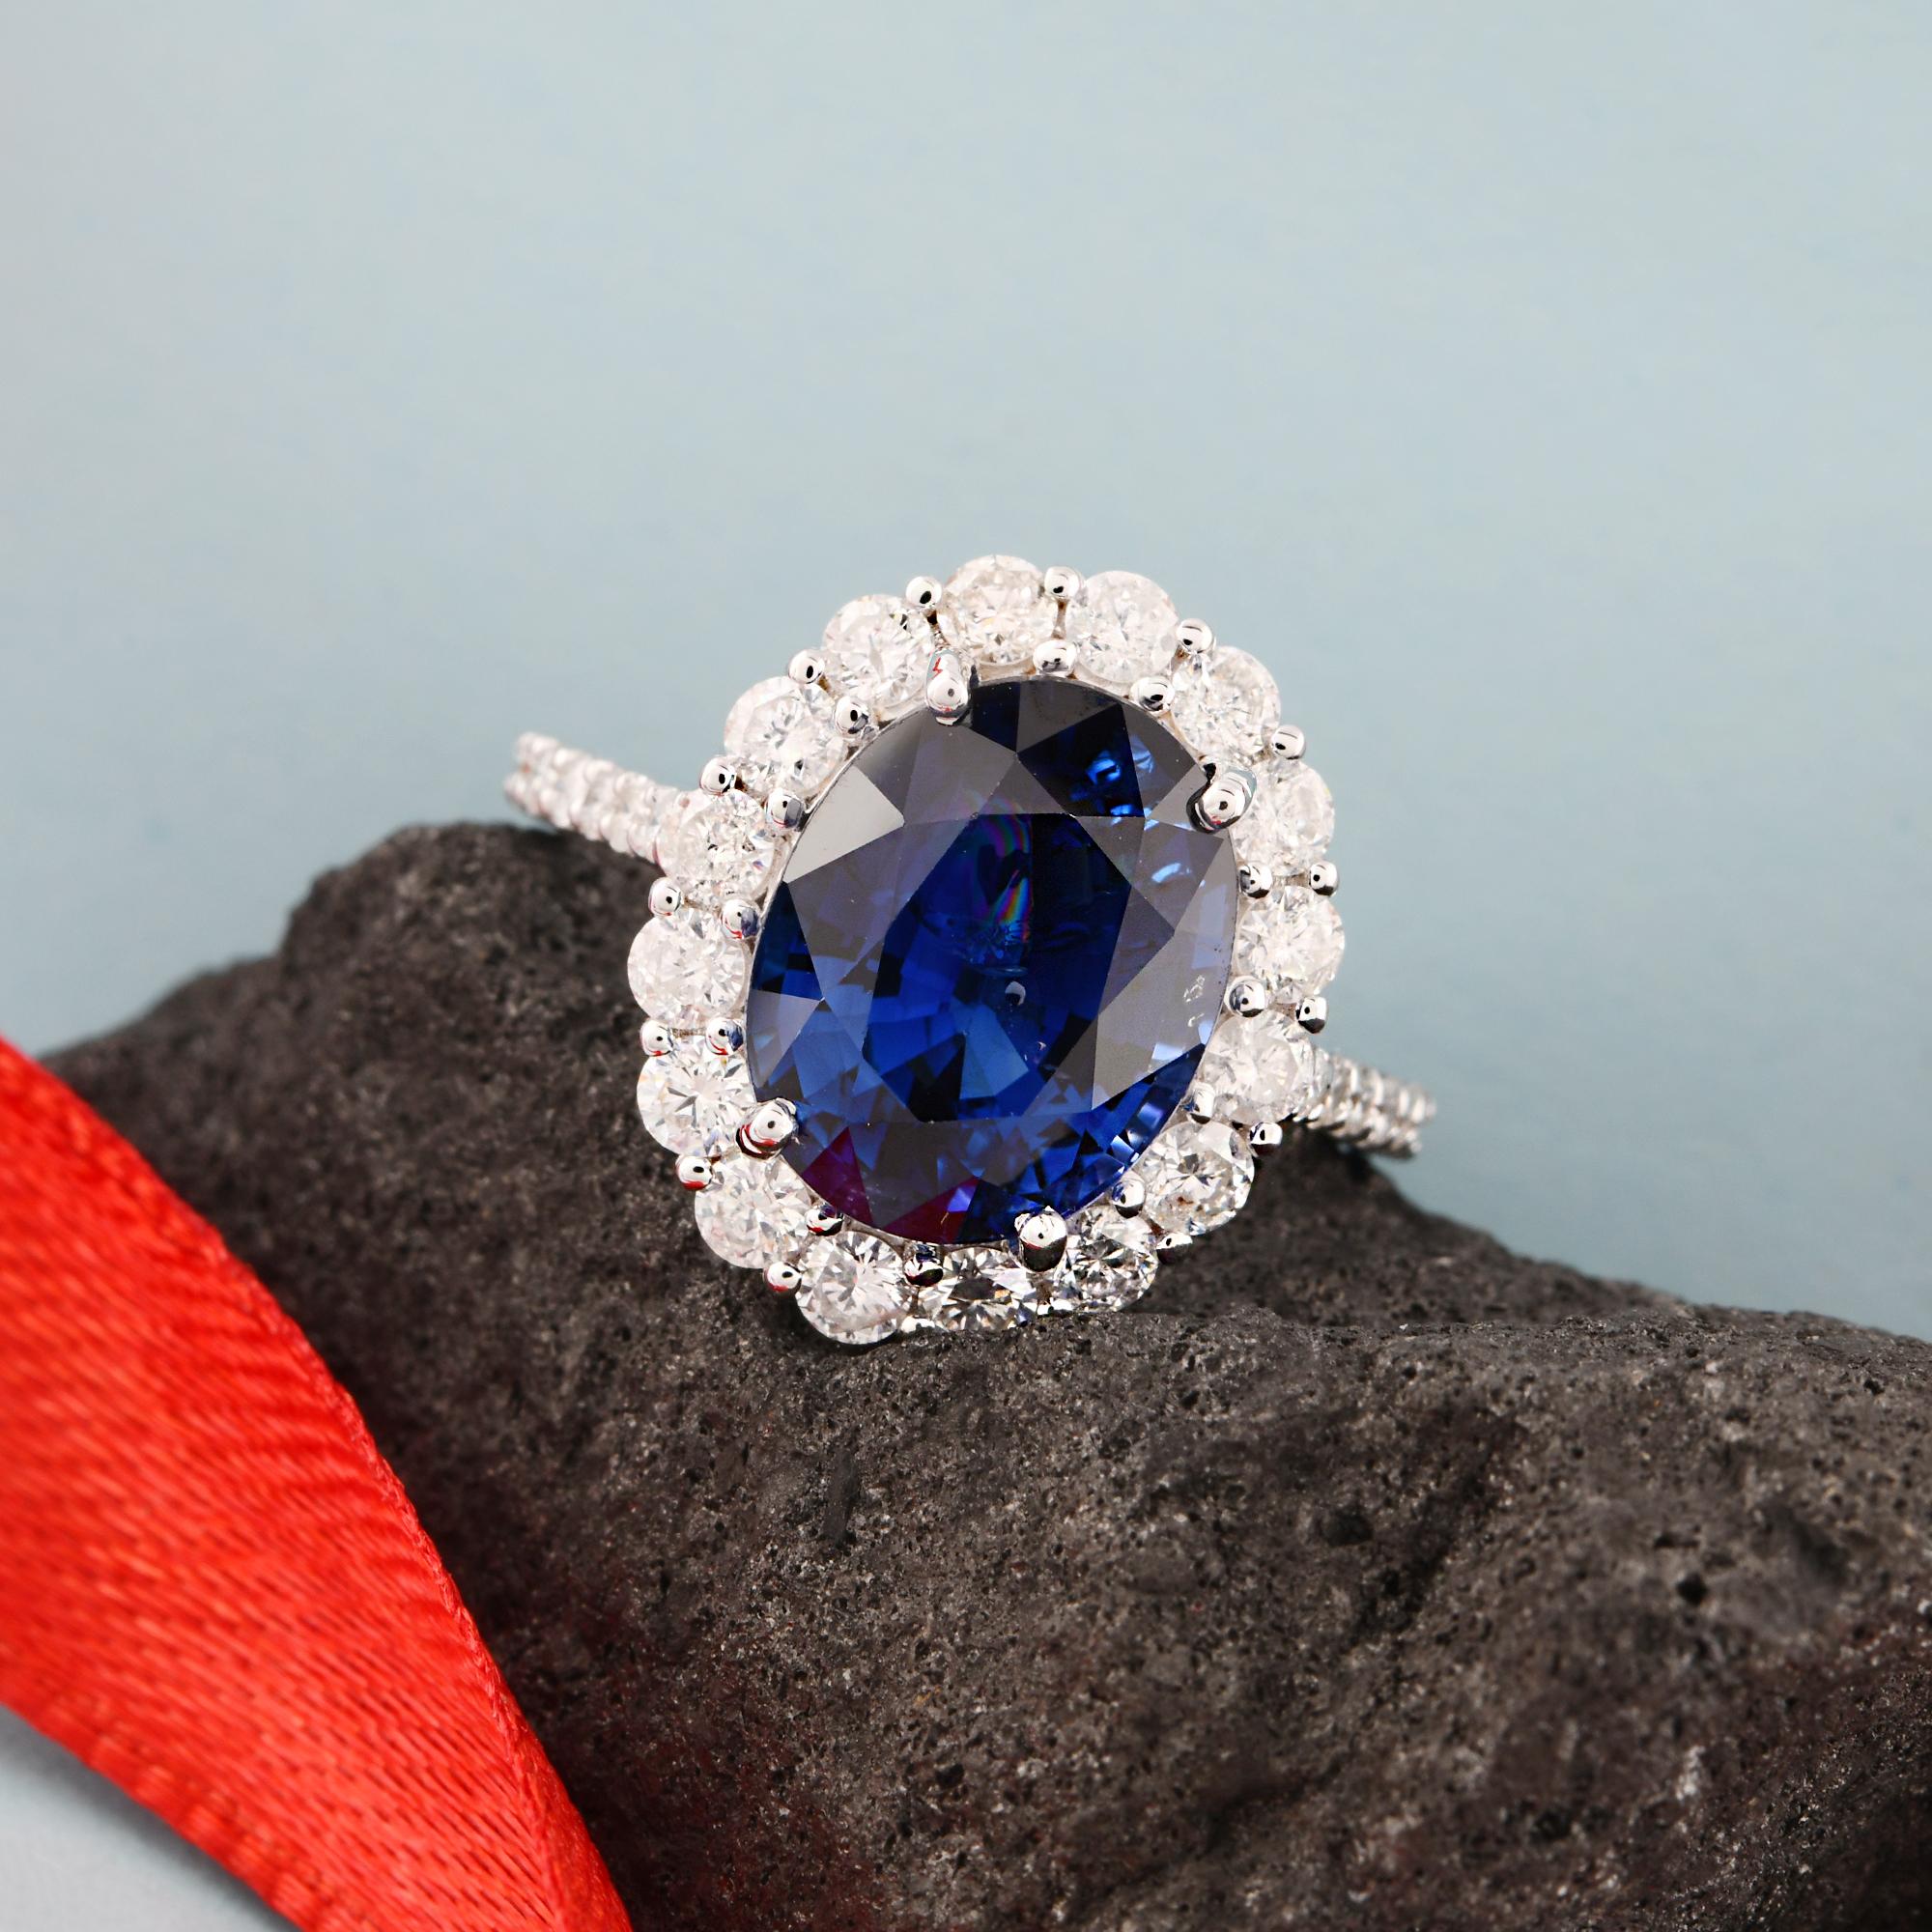 For Sale:  Oval Blue Sapphire Gemstone Ring SI Clarity HI Color Diamond 18 Karat White Gold 6